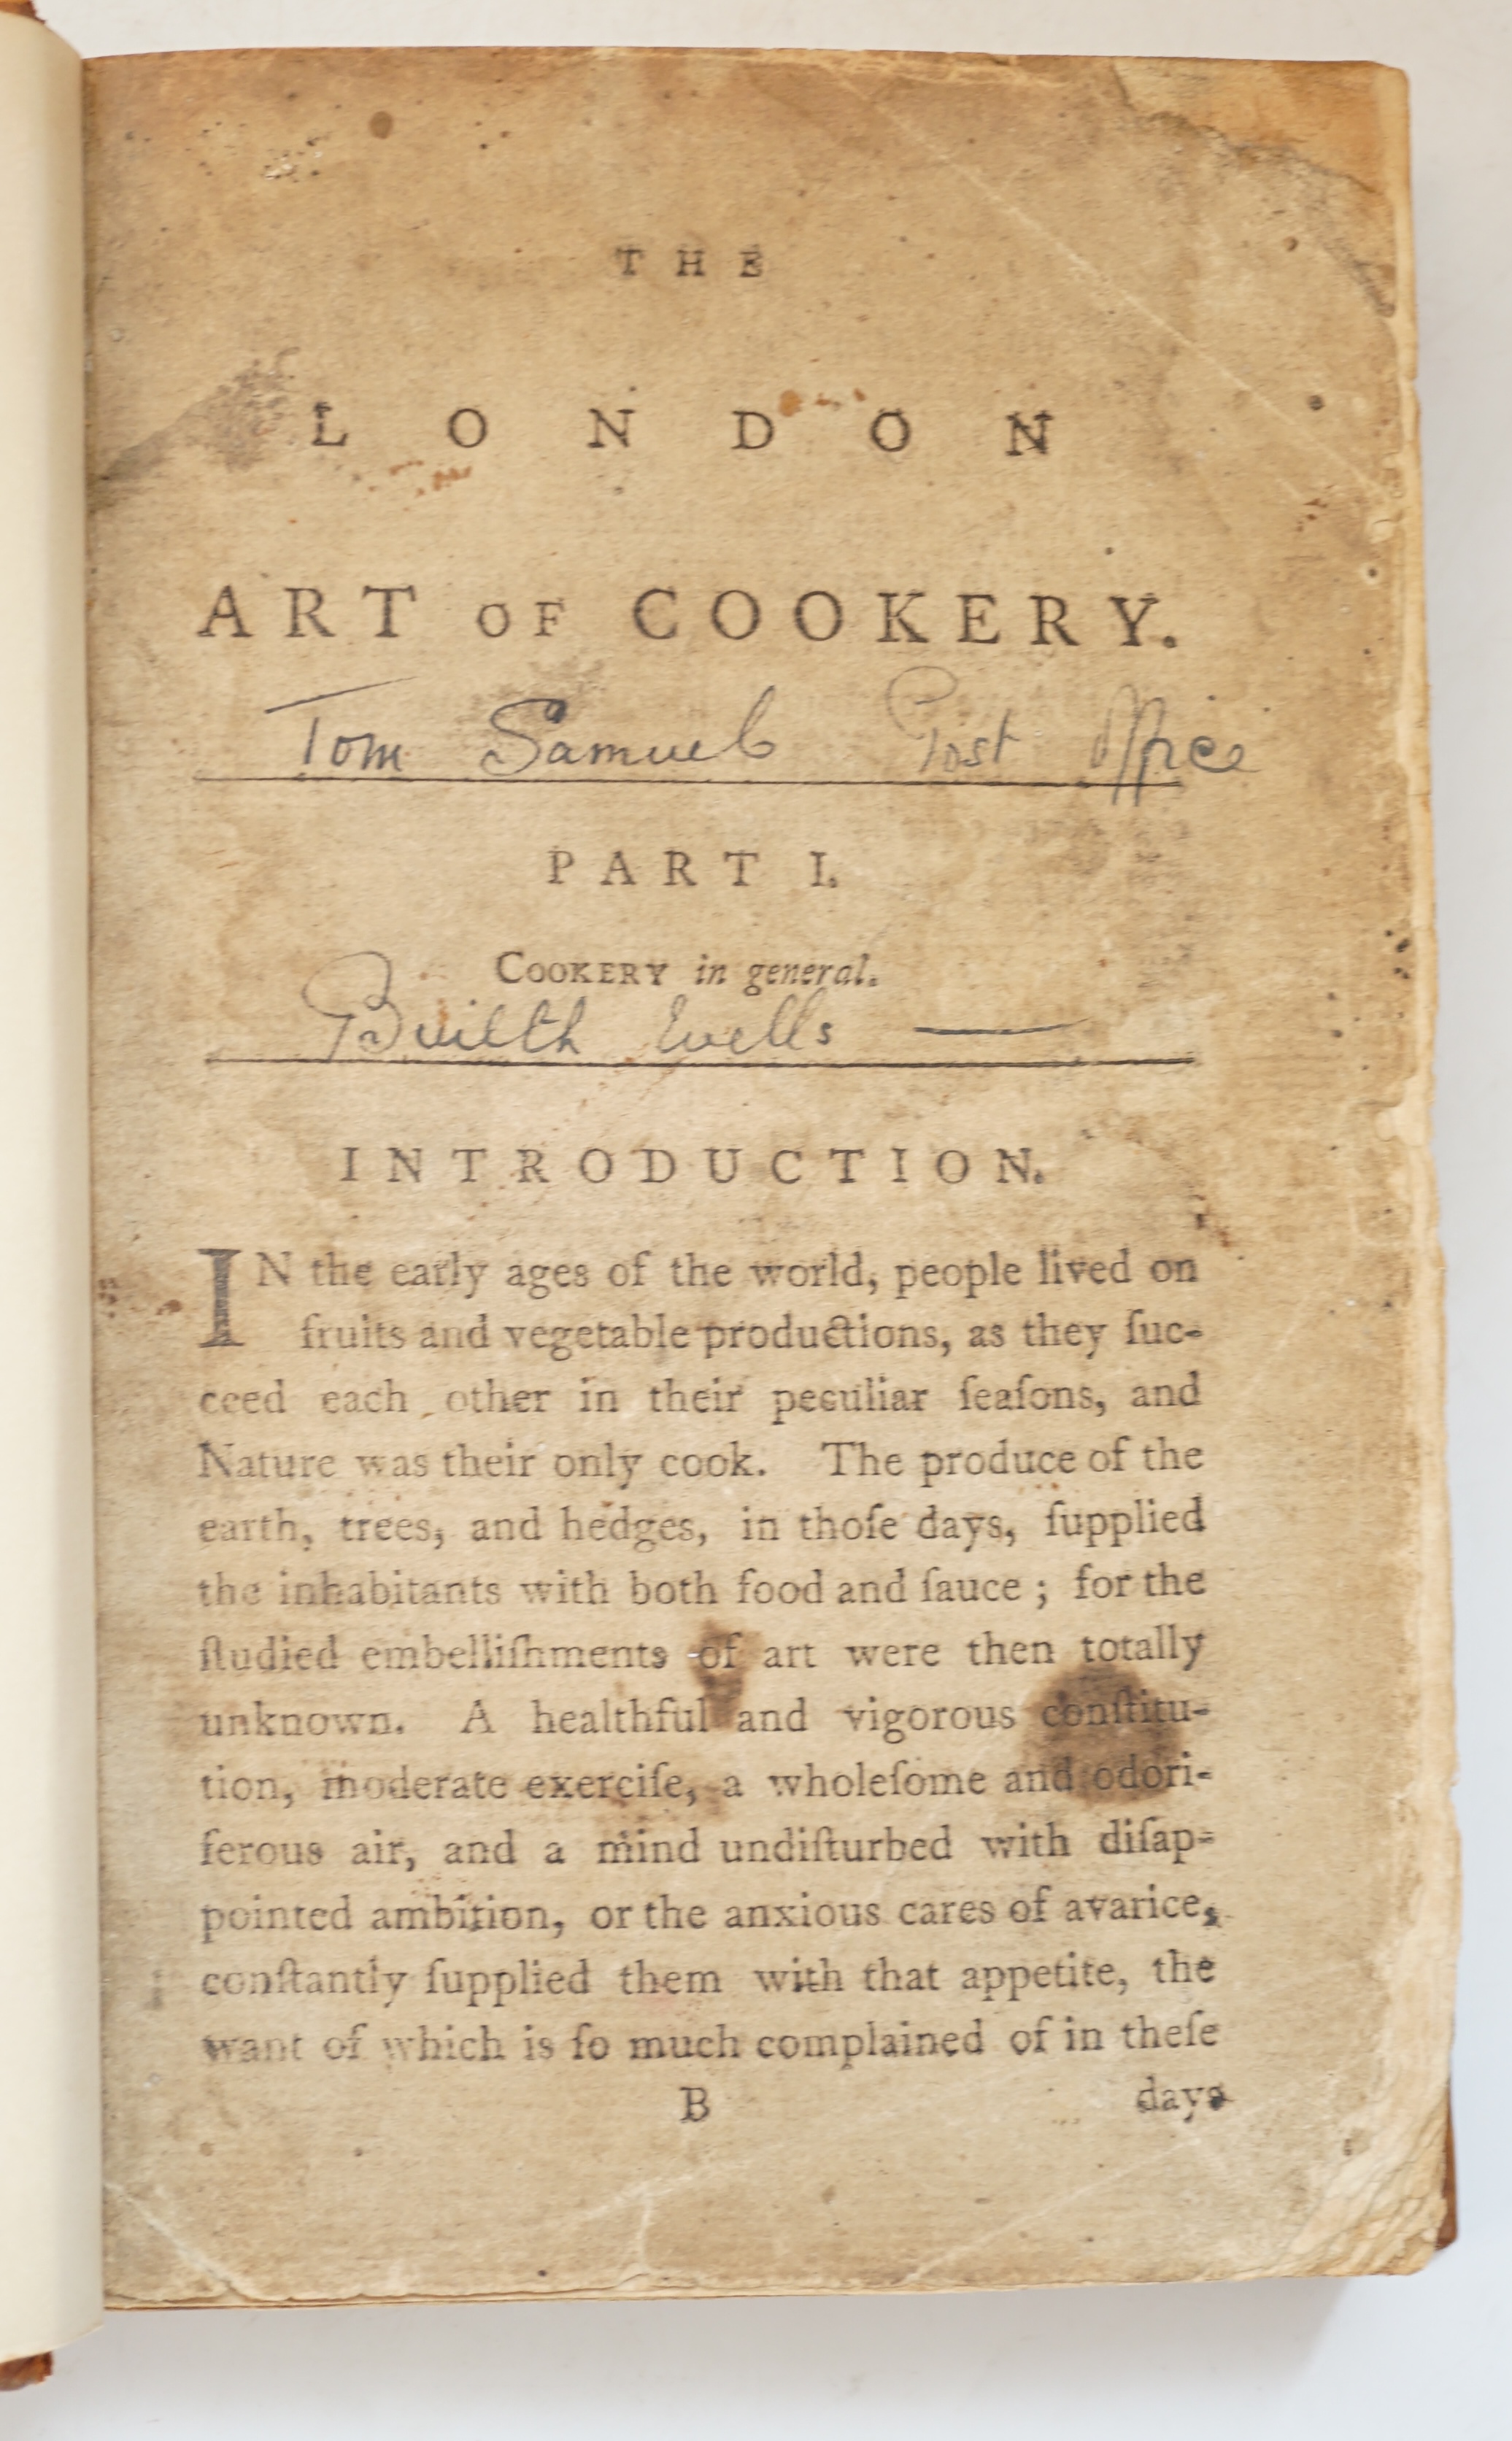 Farley, John - The London Art of Cookery and Housekeeper’s Complete Assistant on a New Plan, 8vo, diced calf rebacked, lacking title, portrait and plates, 8th edition?, London, 1796?